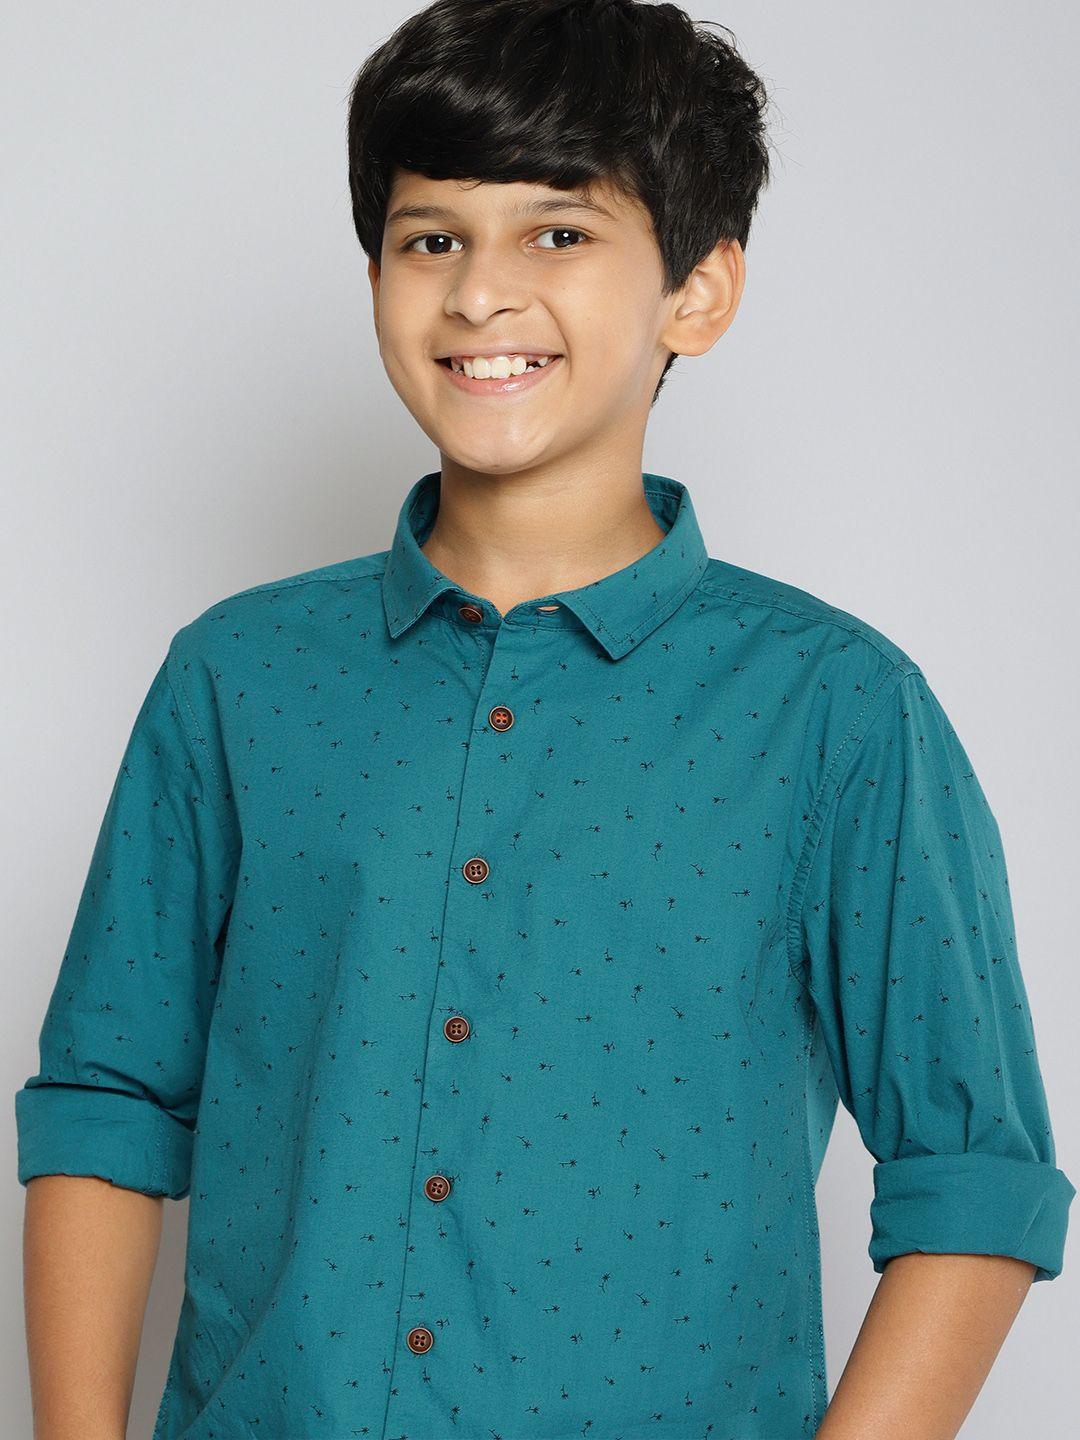 m&h juniors boys teal blue pure cotton slim fit opaque printed casual shirt